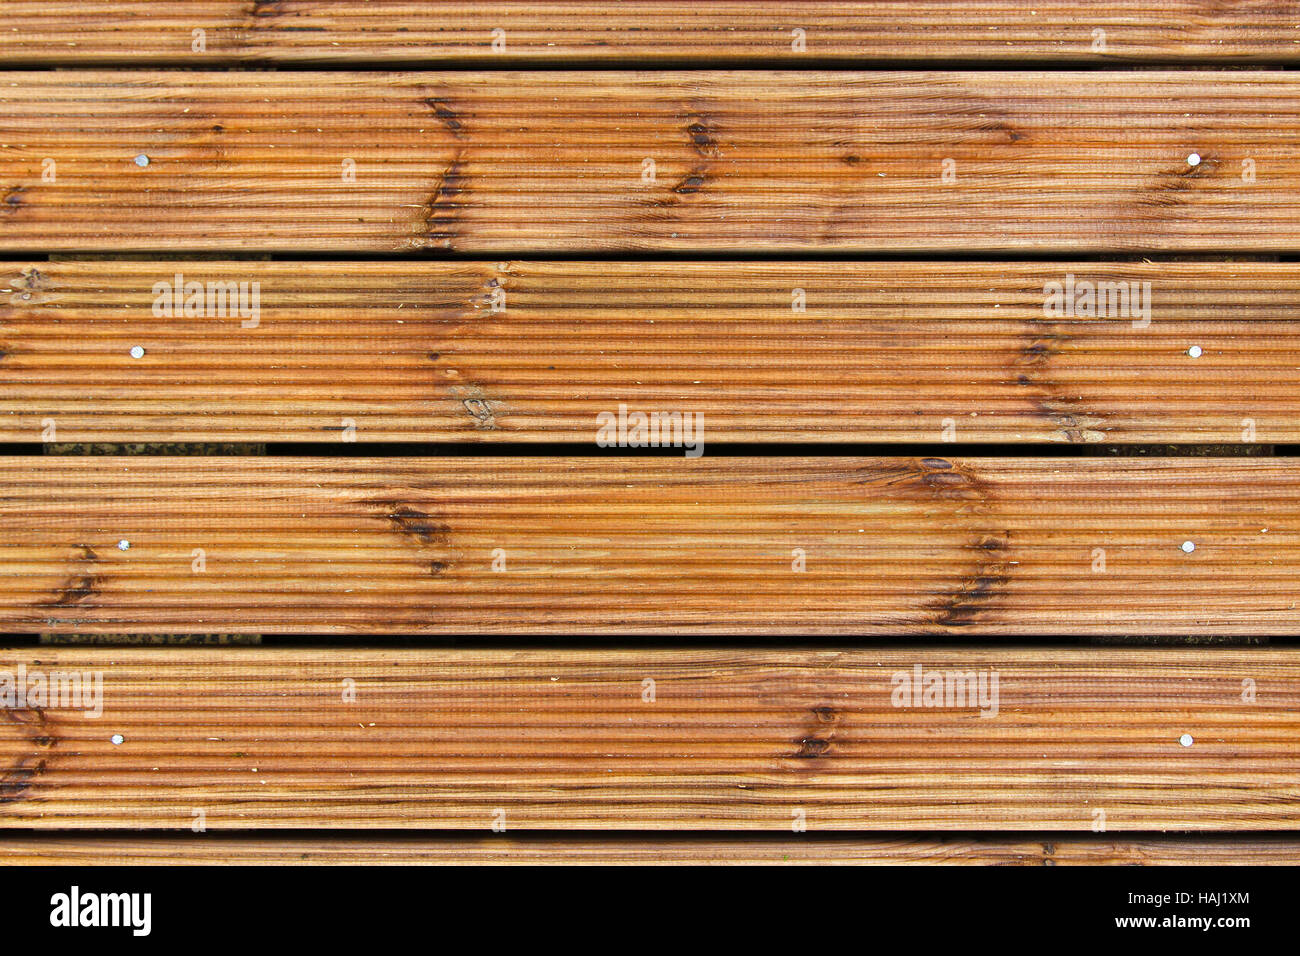 brown wooden plank terrace decking Stock Photo